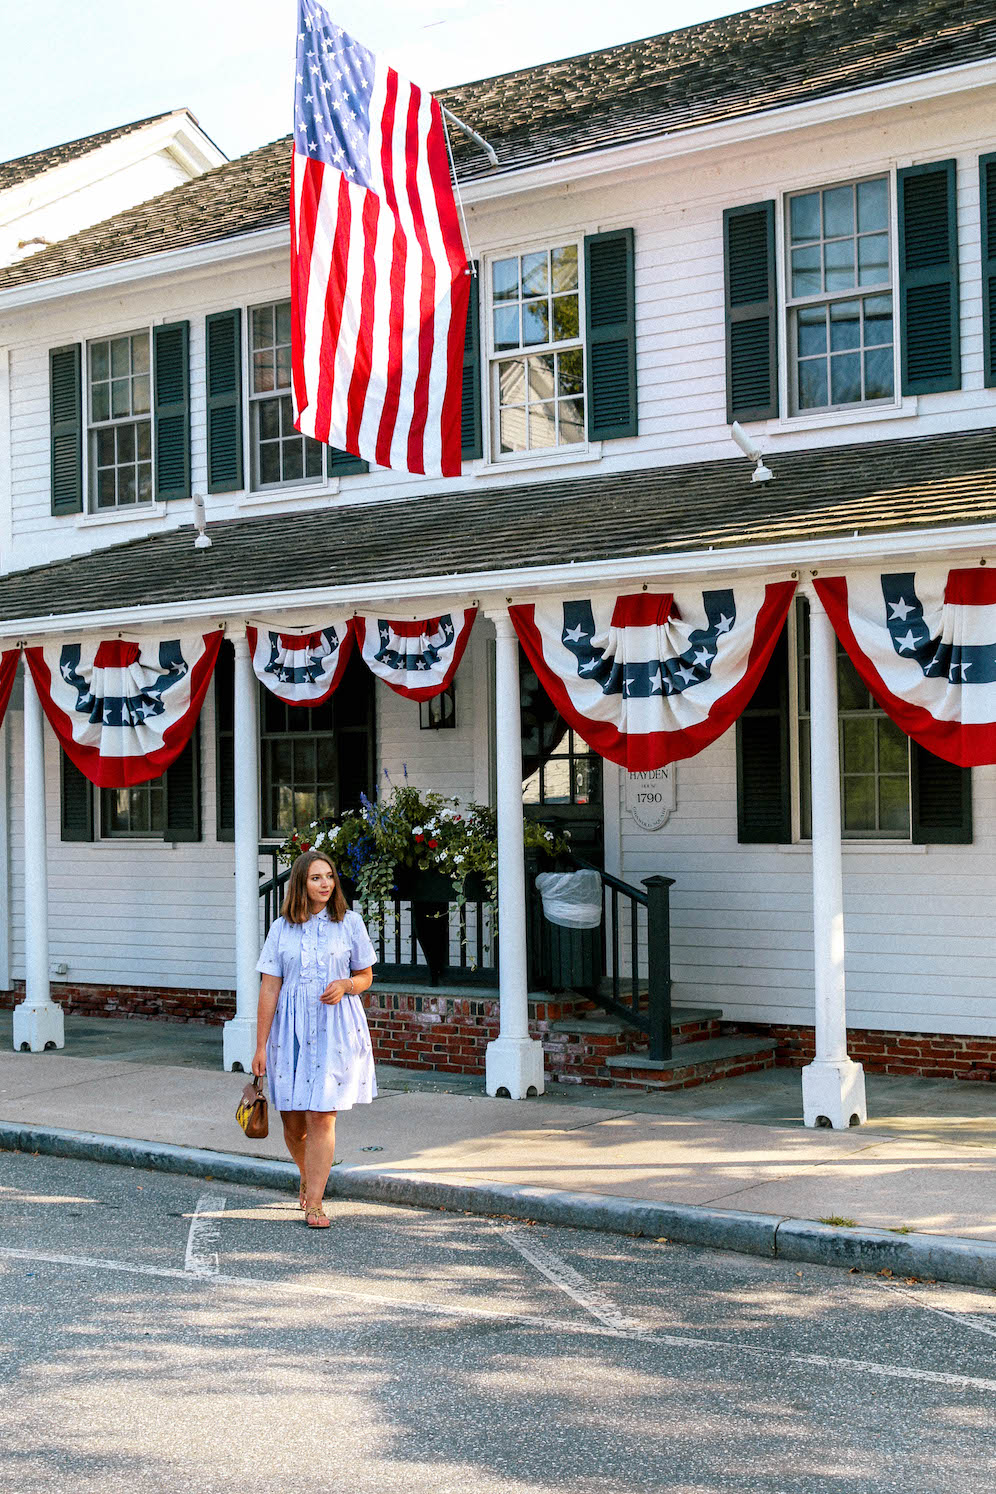 How To Decorate With Flags and Buntings On Your Home The Coastal Confidence Aubrey Yandow